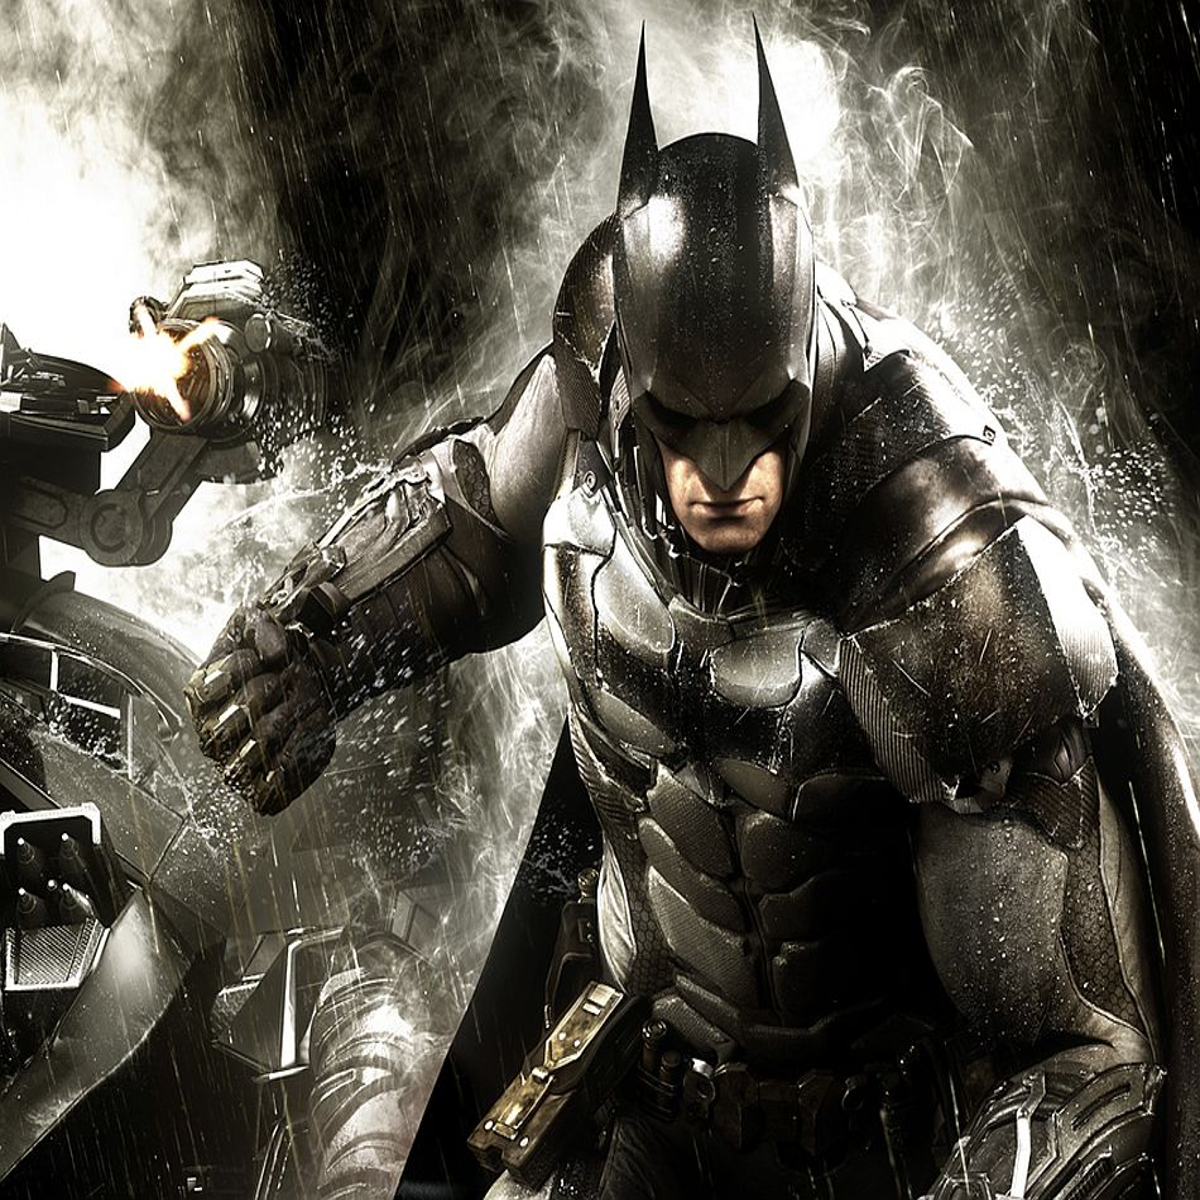 Batman Arkham Knight Review Scores Currently Averaging Over 90 On